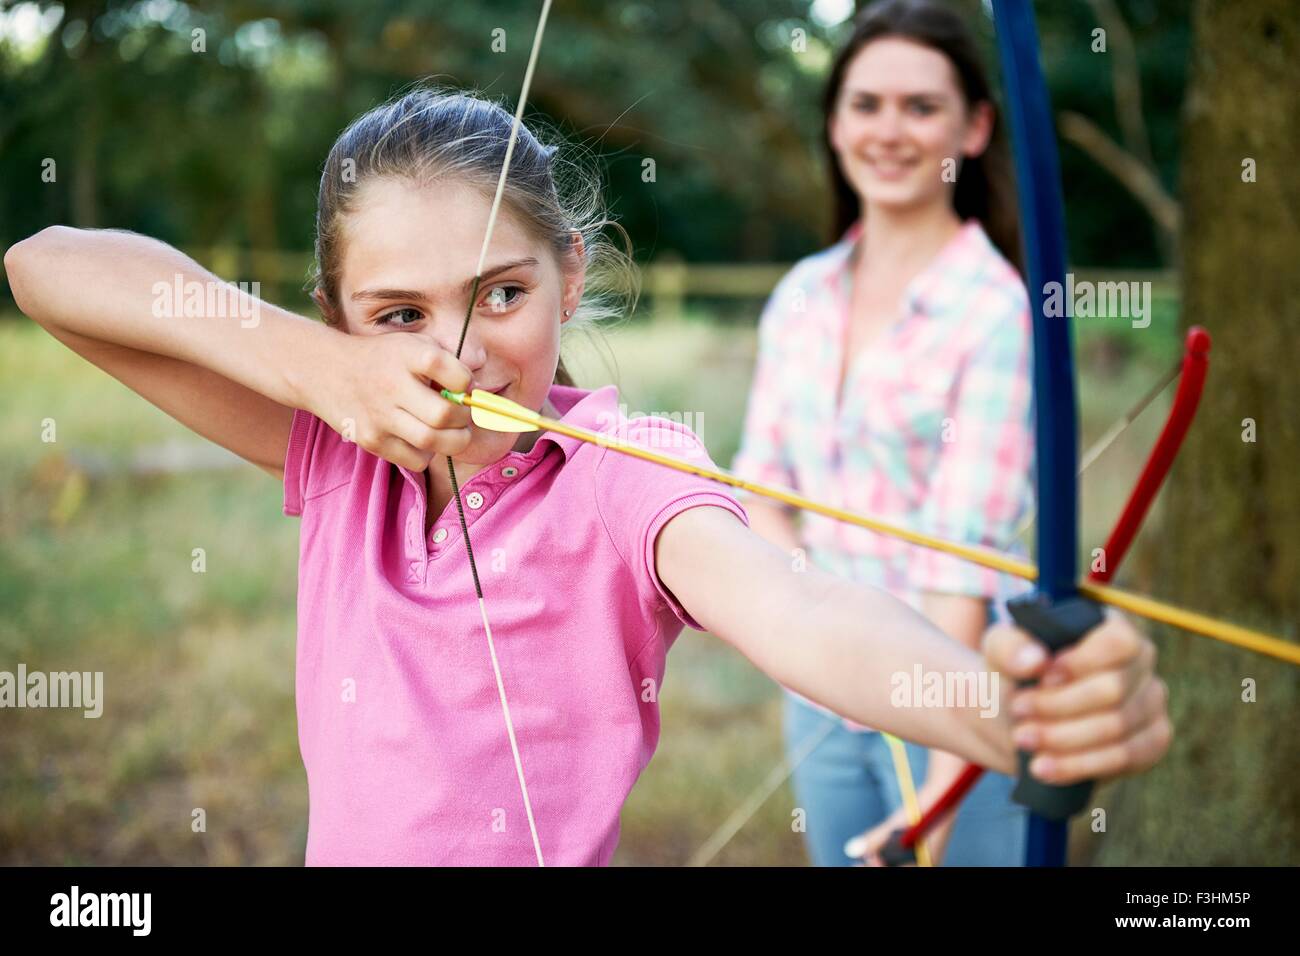 Girl practicing archery aiming with bow and arrow Stock Photo